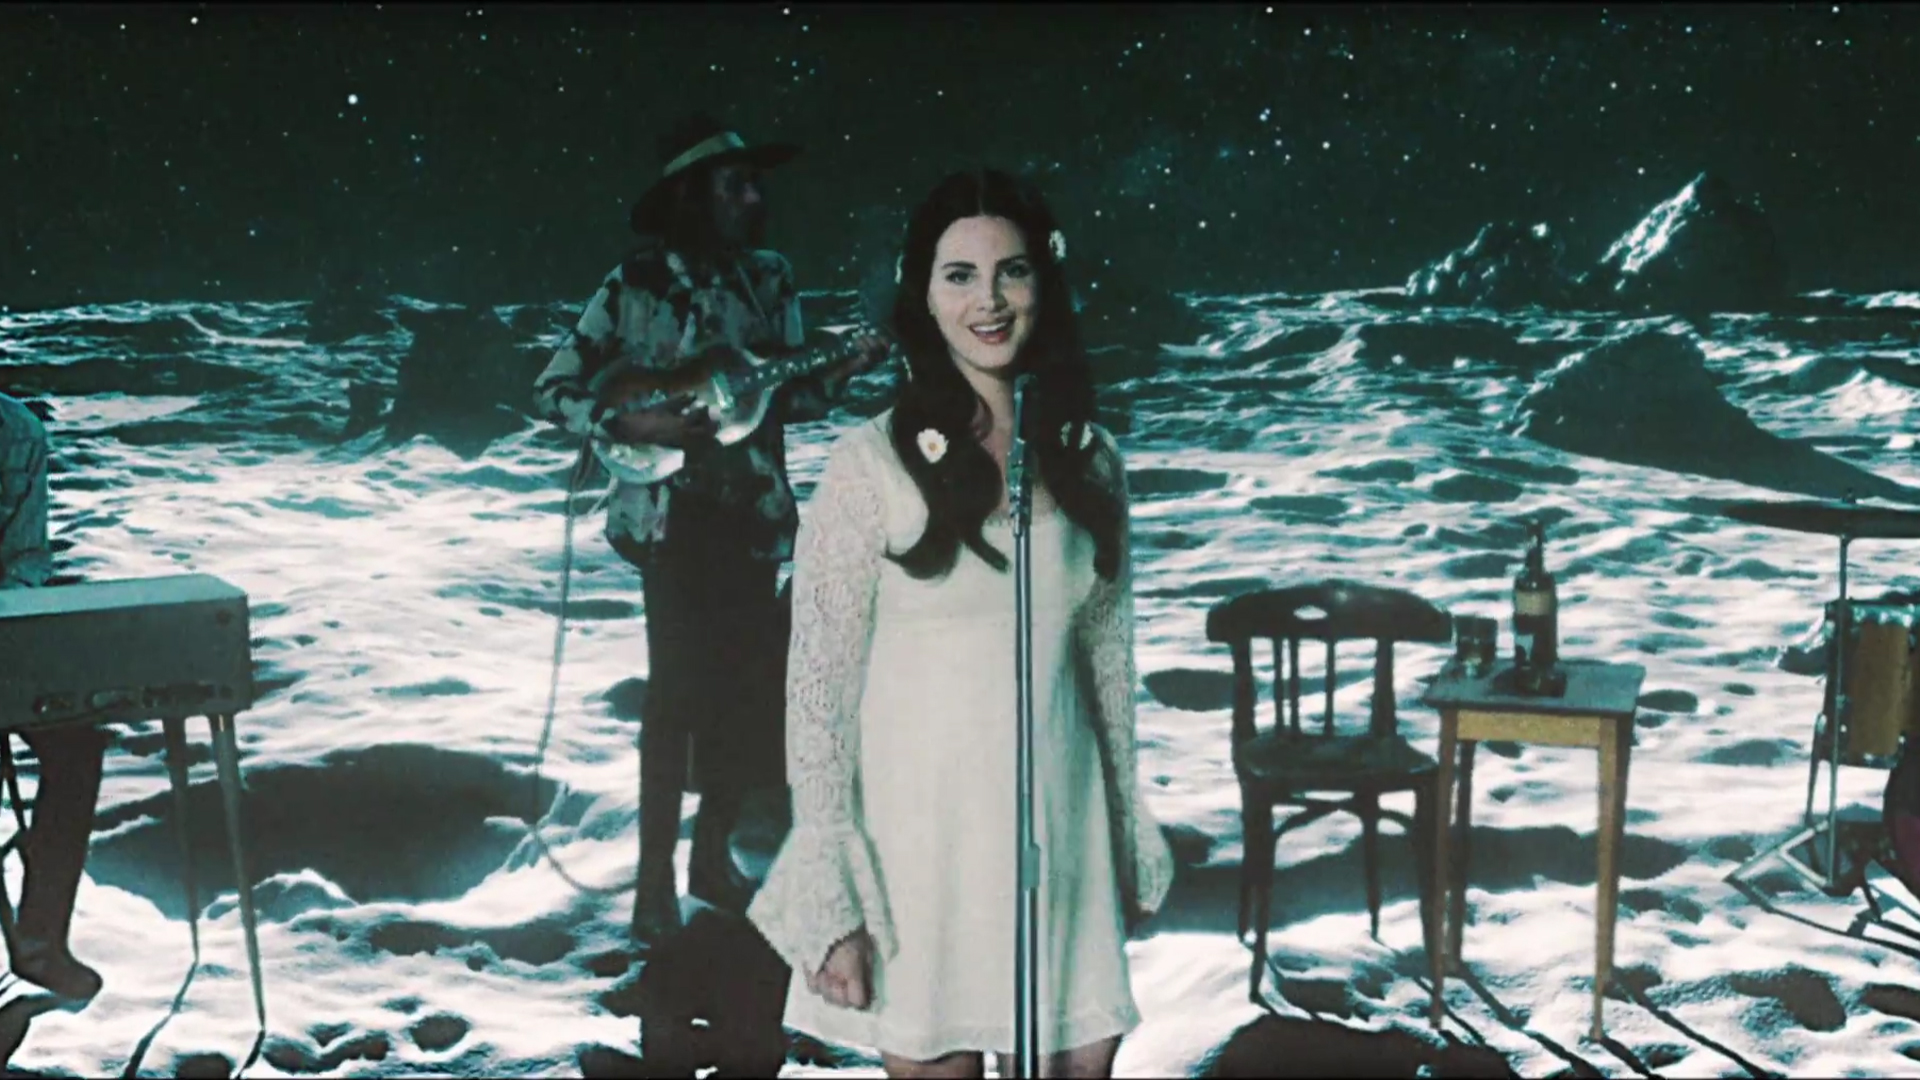 In Love with Lana Del Rey